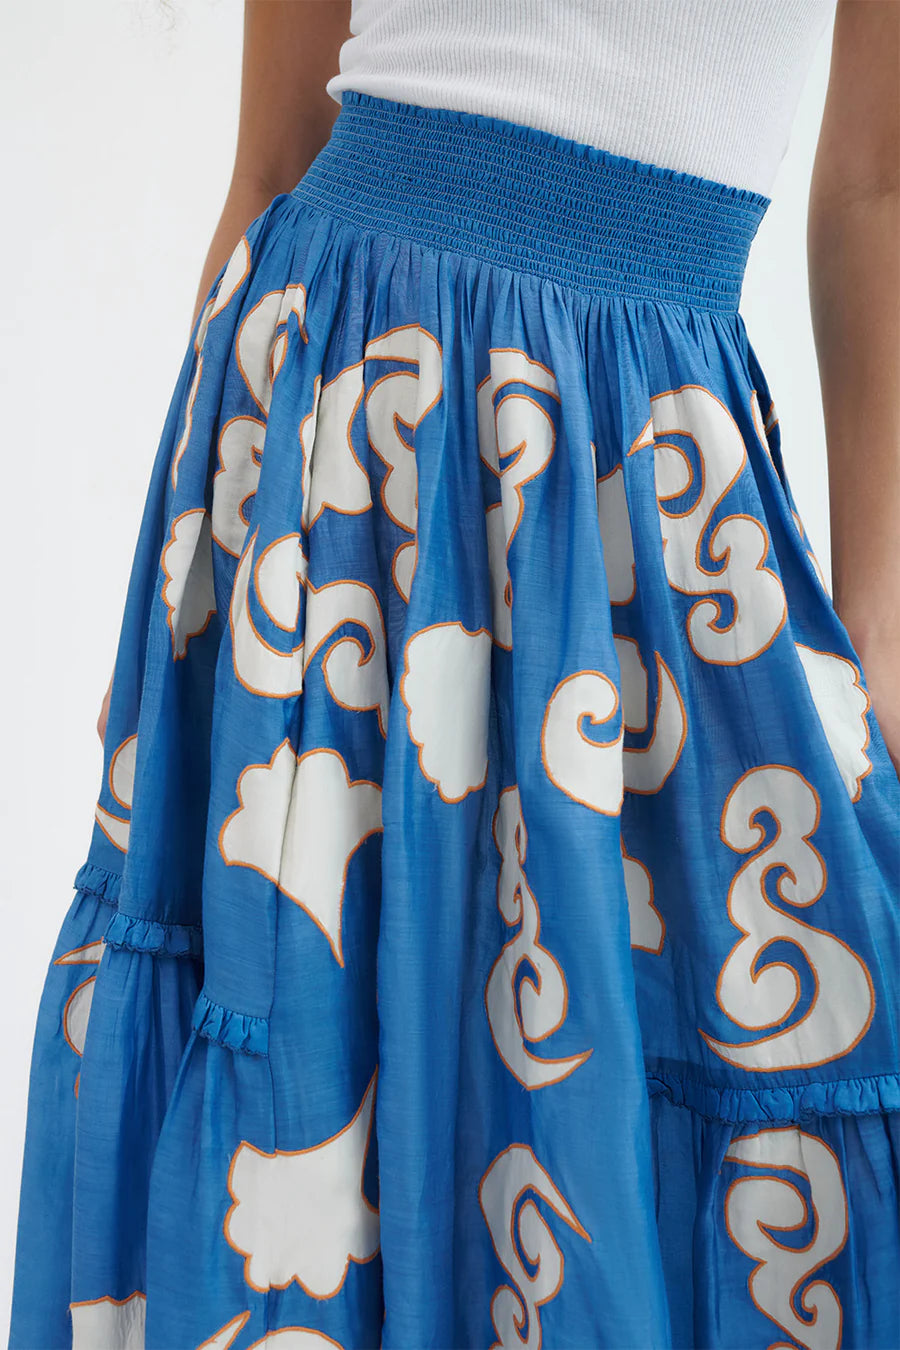 Thomas Patch Embroidered Skirt